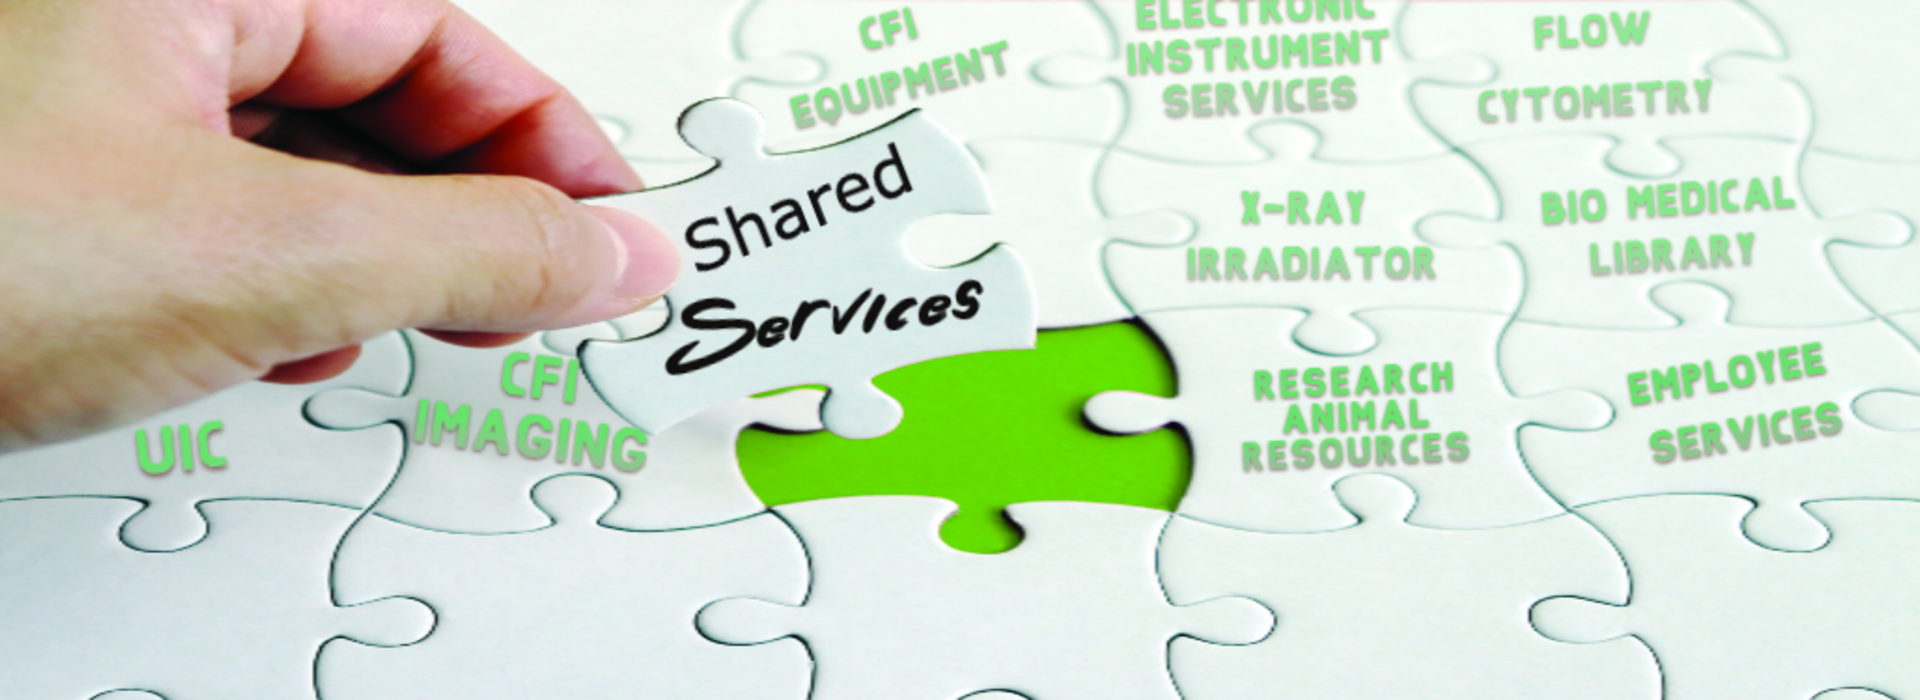 immunology-shared services